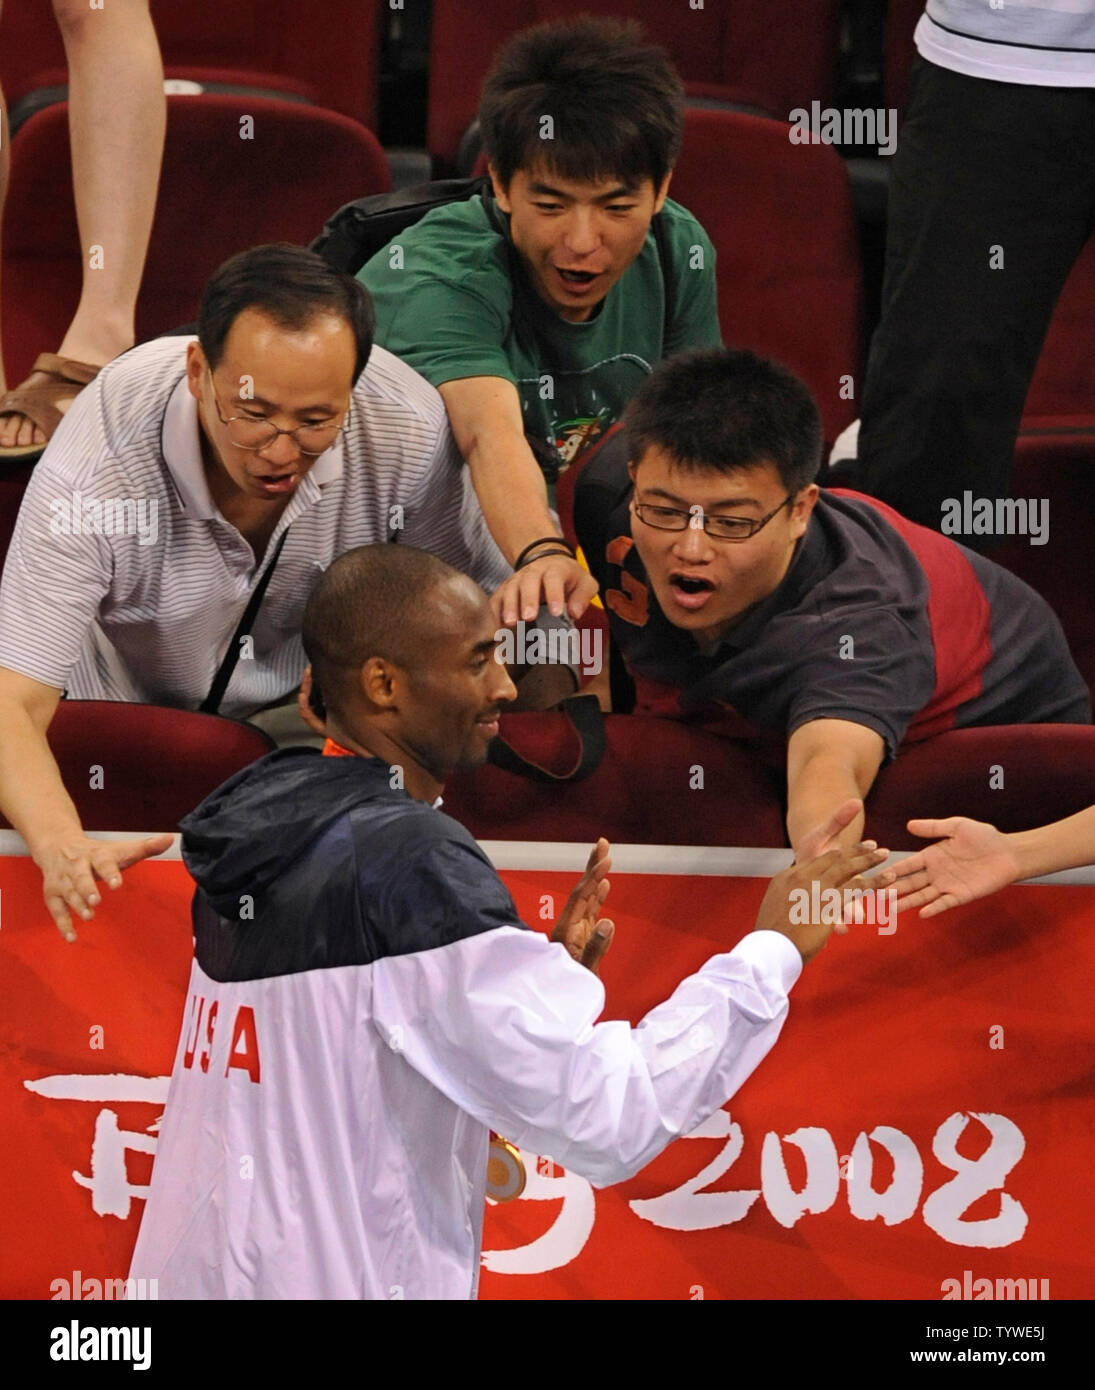 USA's Chris Paul during the Men's Basketball Final, USA vs Spain at the Beijing  2008 Olympics in Beijing, China on August 24, 2008. USA won 118-107. Photo  by Gouhier-Hahn-Nebinger/Cameleon/ABACAPRESS.COM Stock Photo 